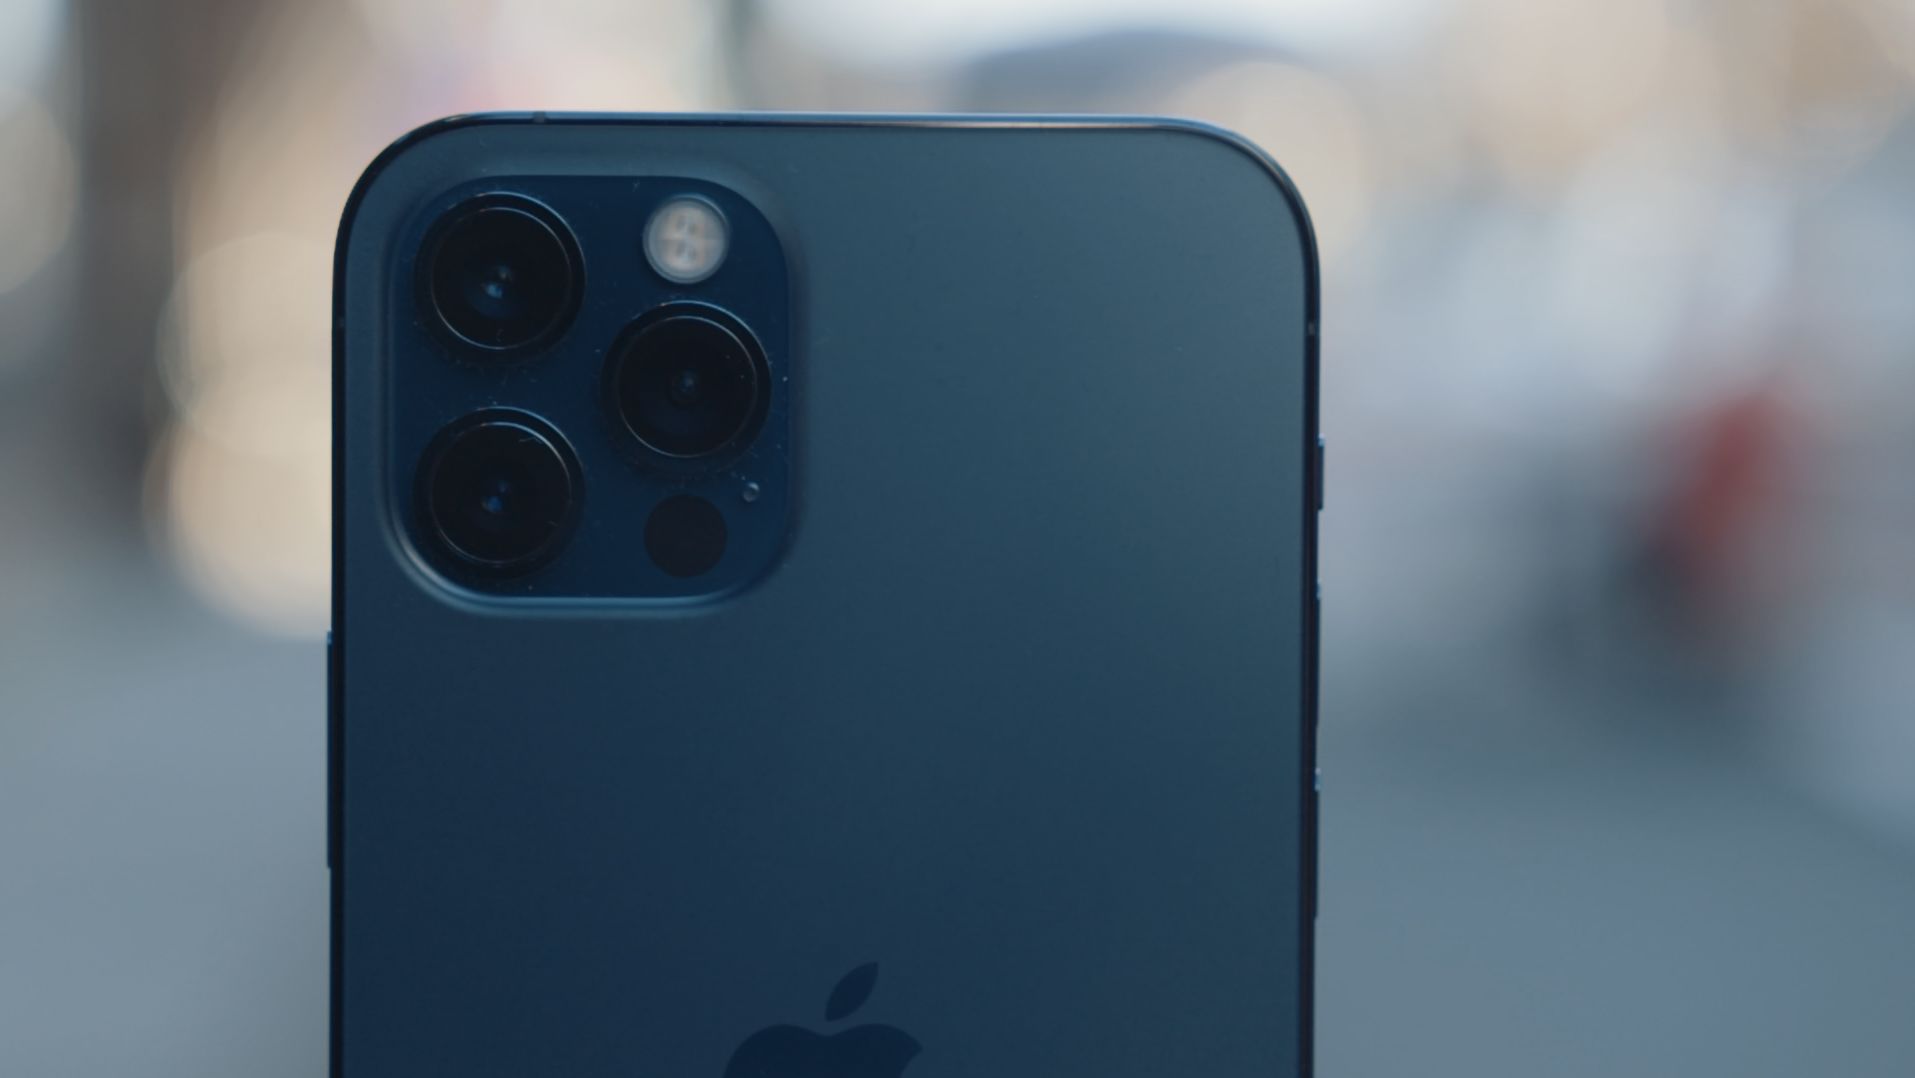 iPhone 12 Review: New Design and Camera Impress, Not 5G